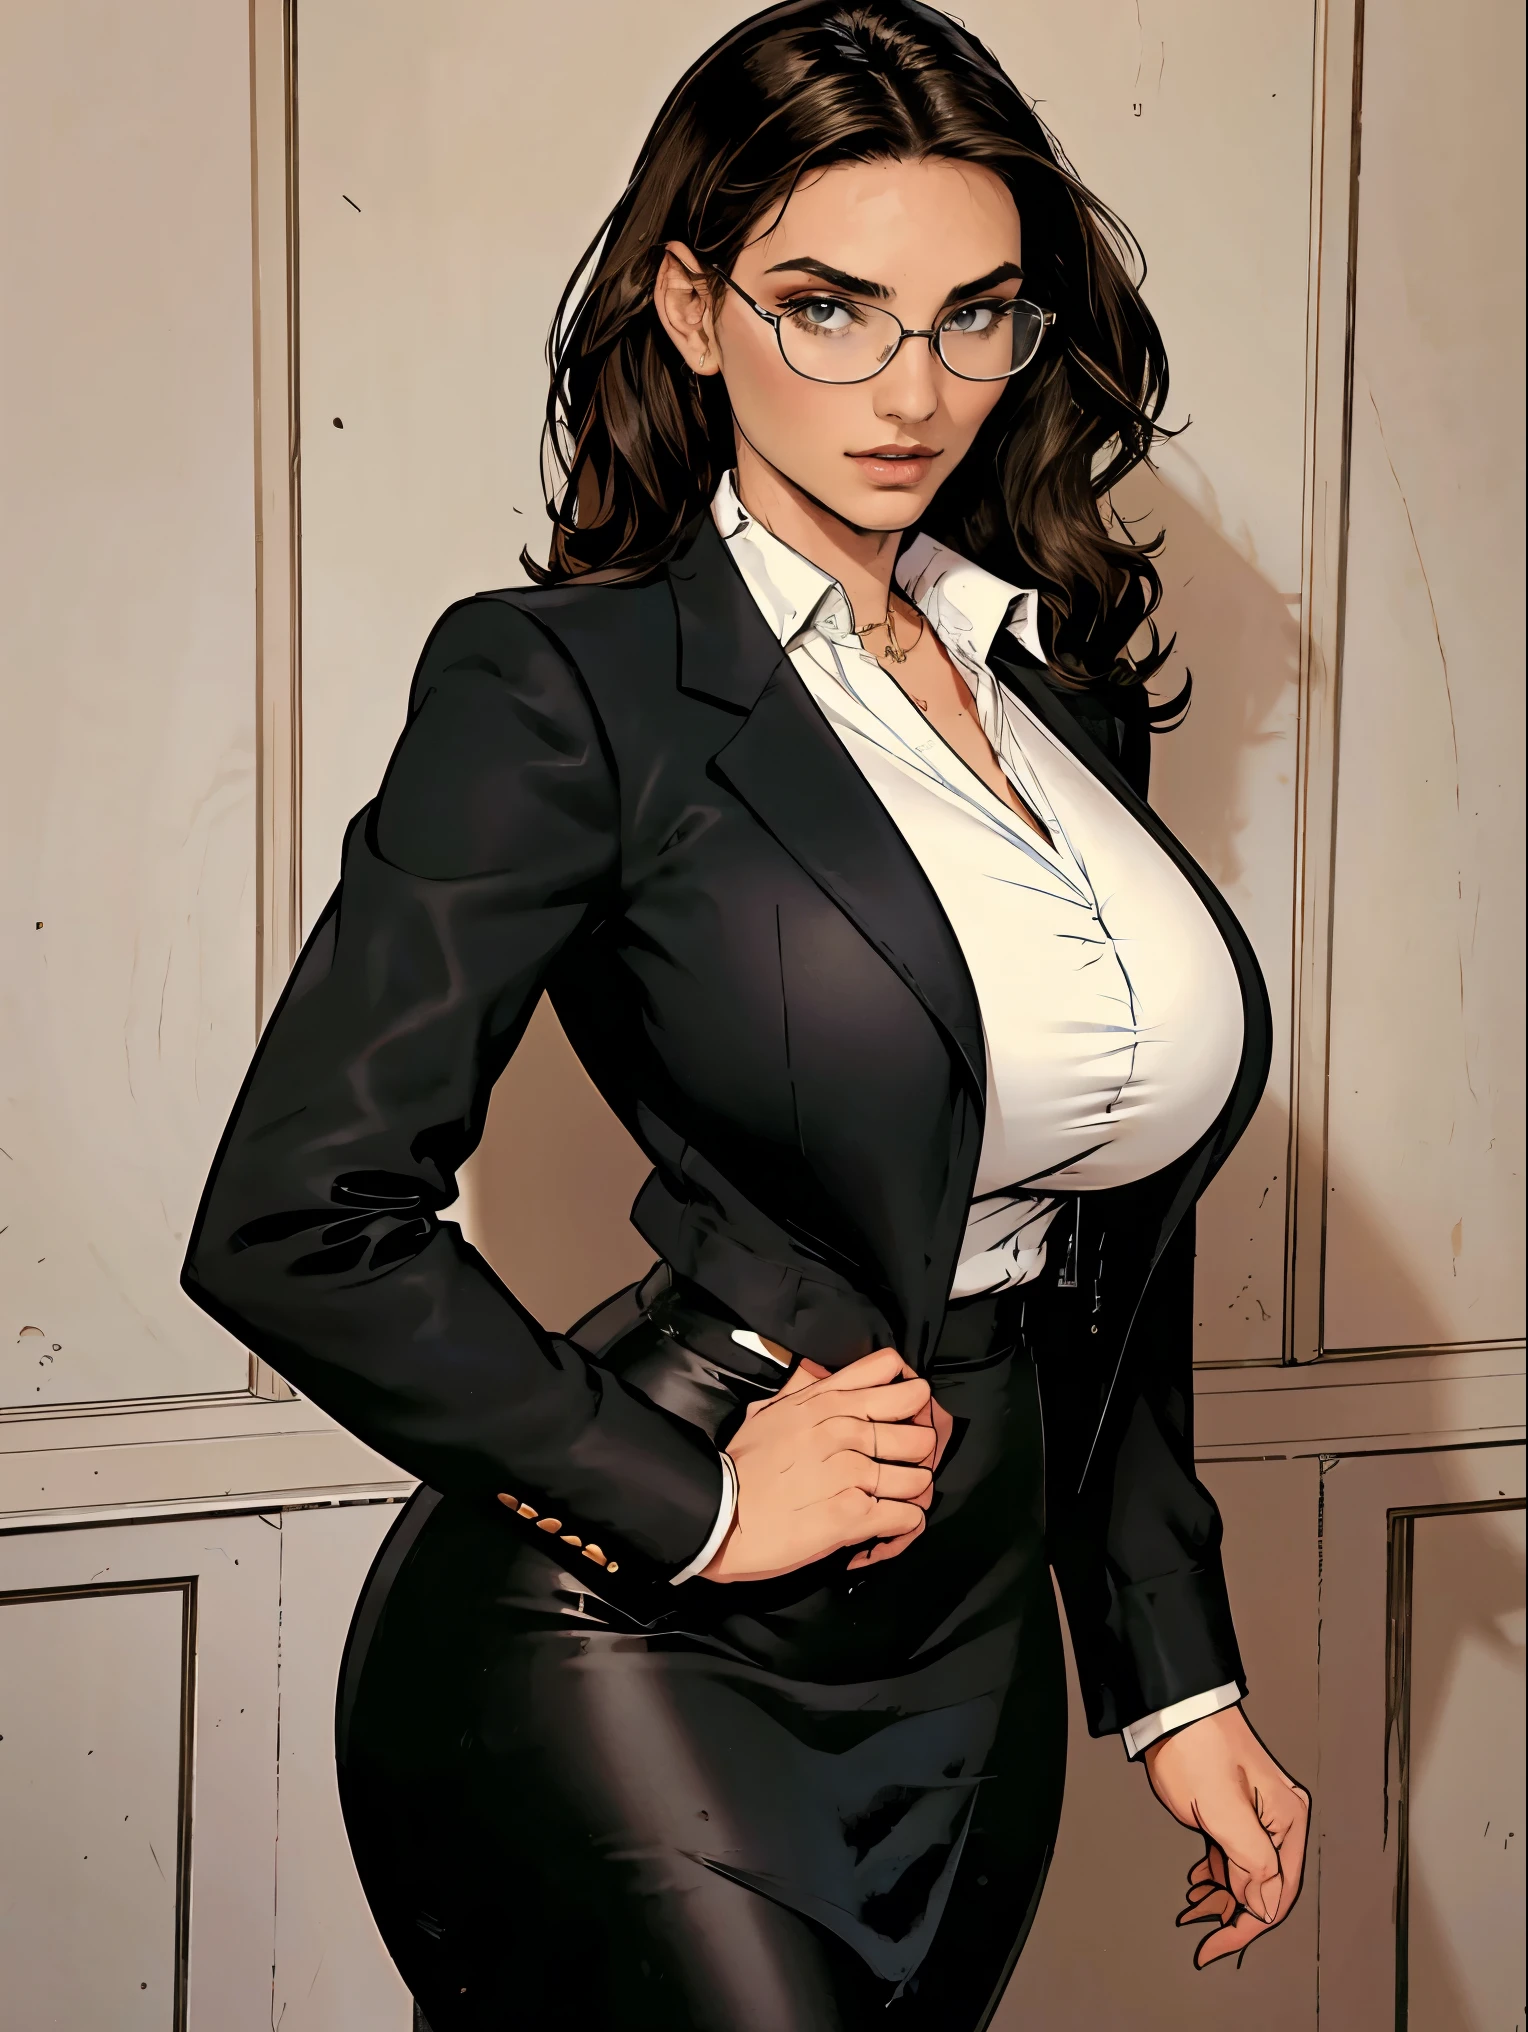 Gorgeous and sultry busty athletic (thin) brunette with sharp facial features and a (large nose) and (huge boobs) wearing a black blazer, white blouse and black pencil skirt, glasses